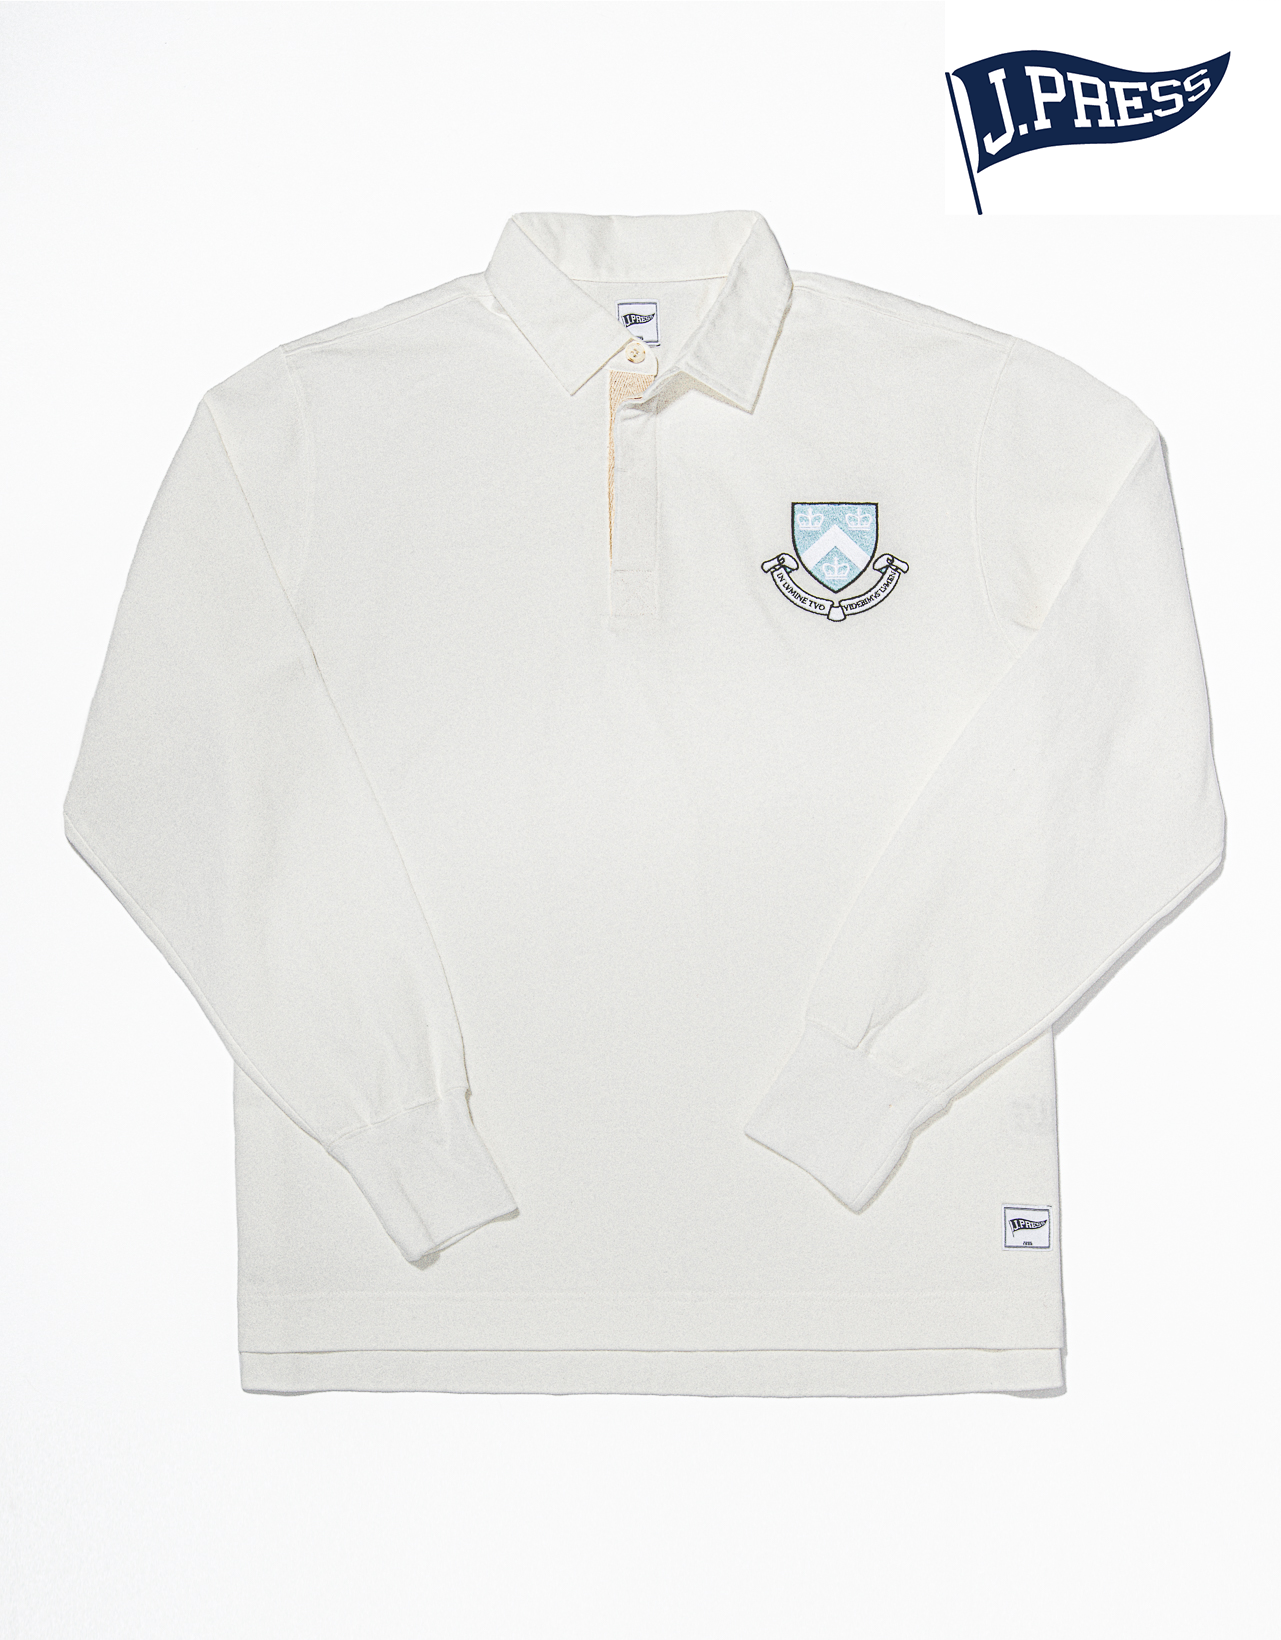 COLUMBIA RUGBY SHIRT - WHITE